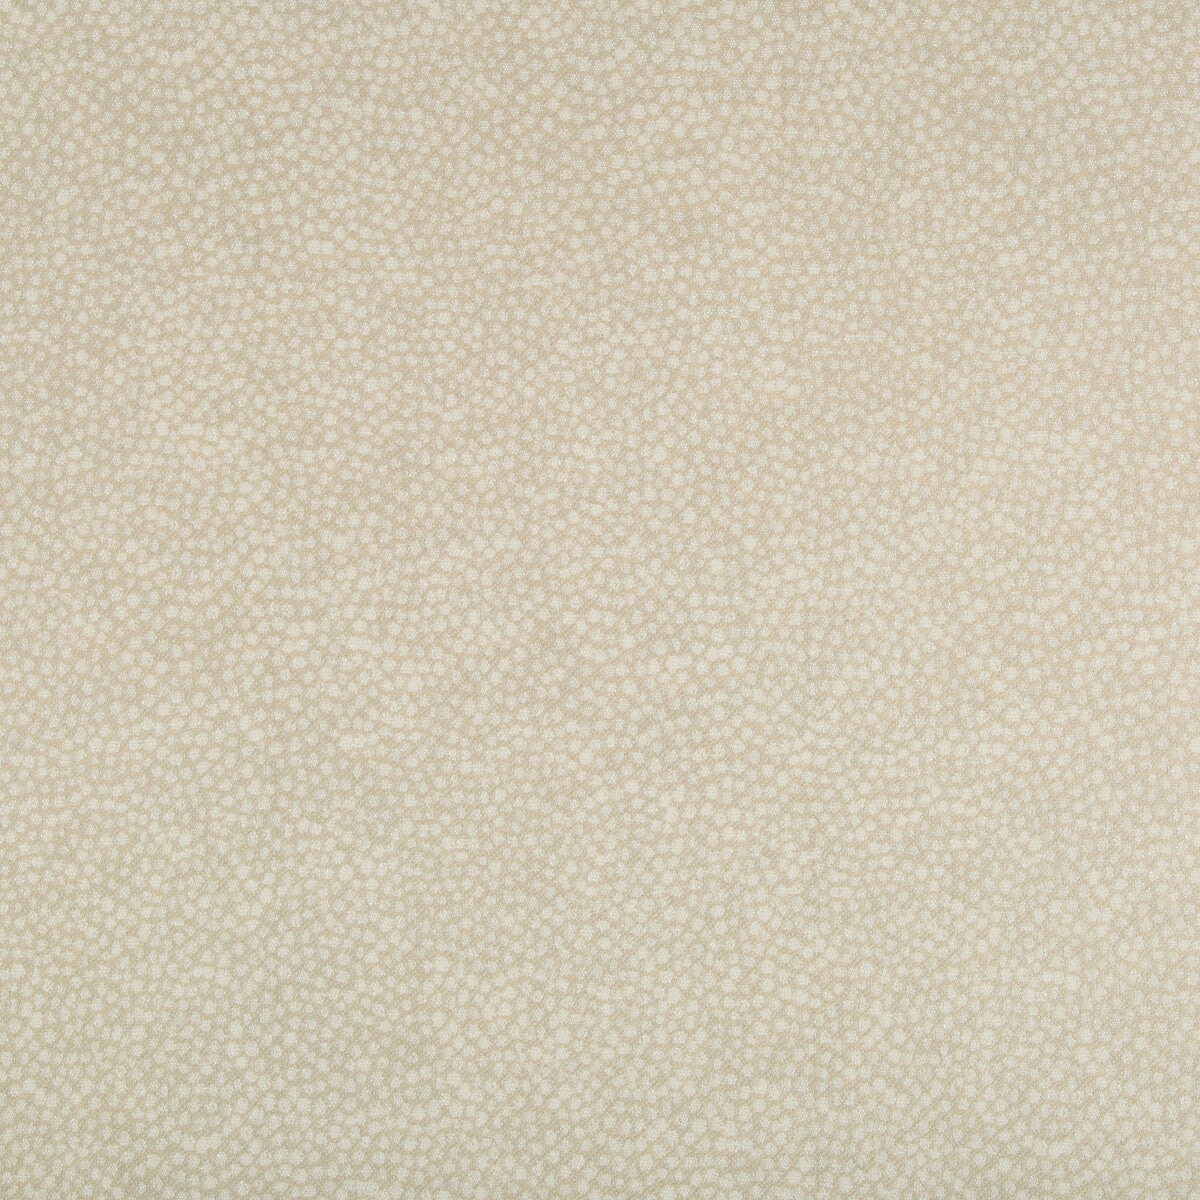 Pebbledot fabric in sand color - pattern 35064.16.0 - by Kravet Basics in the Jeffrey Alan Marks Oceanview collection